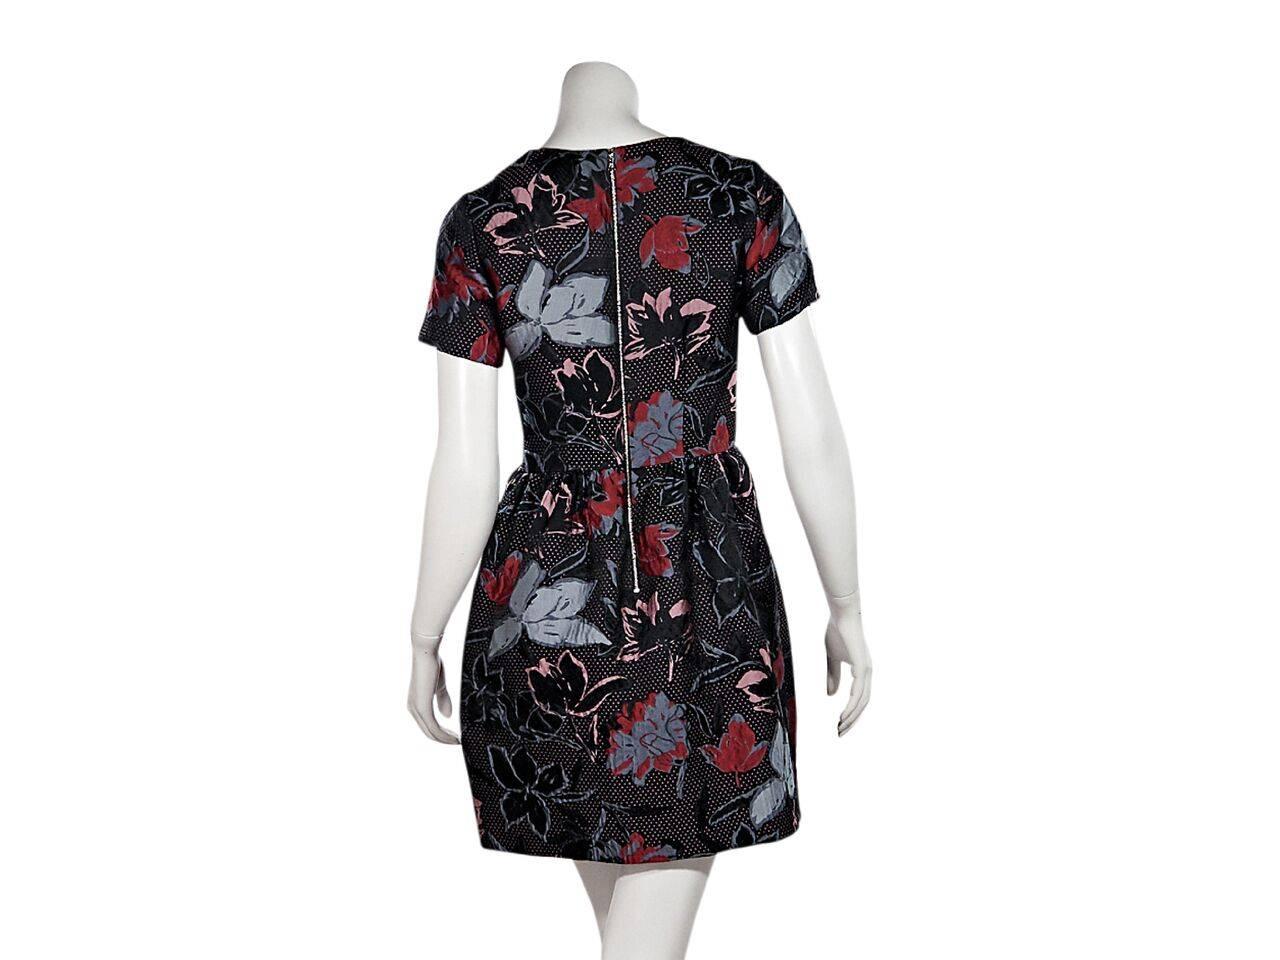 Product details:  Multicolor floral and polka dot fit-and-flare dress by Suno.  Roundneck.  Short sleeves.  Exposed back zip closure.  
Condition: Pre-owned. Very good.
Est. Retail $ 845.00